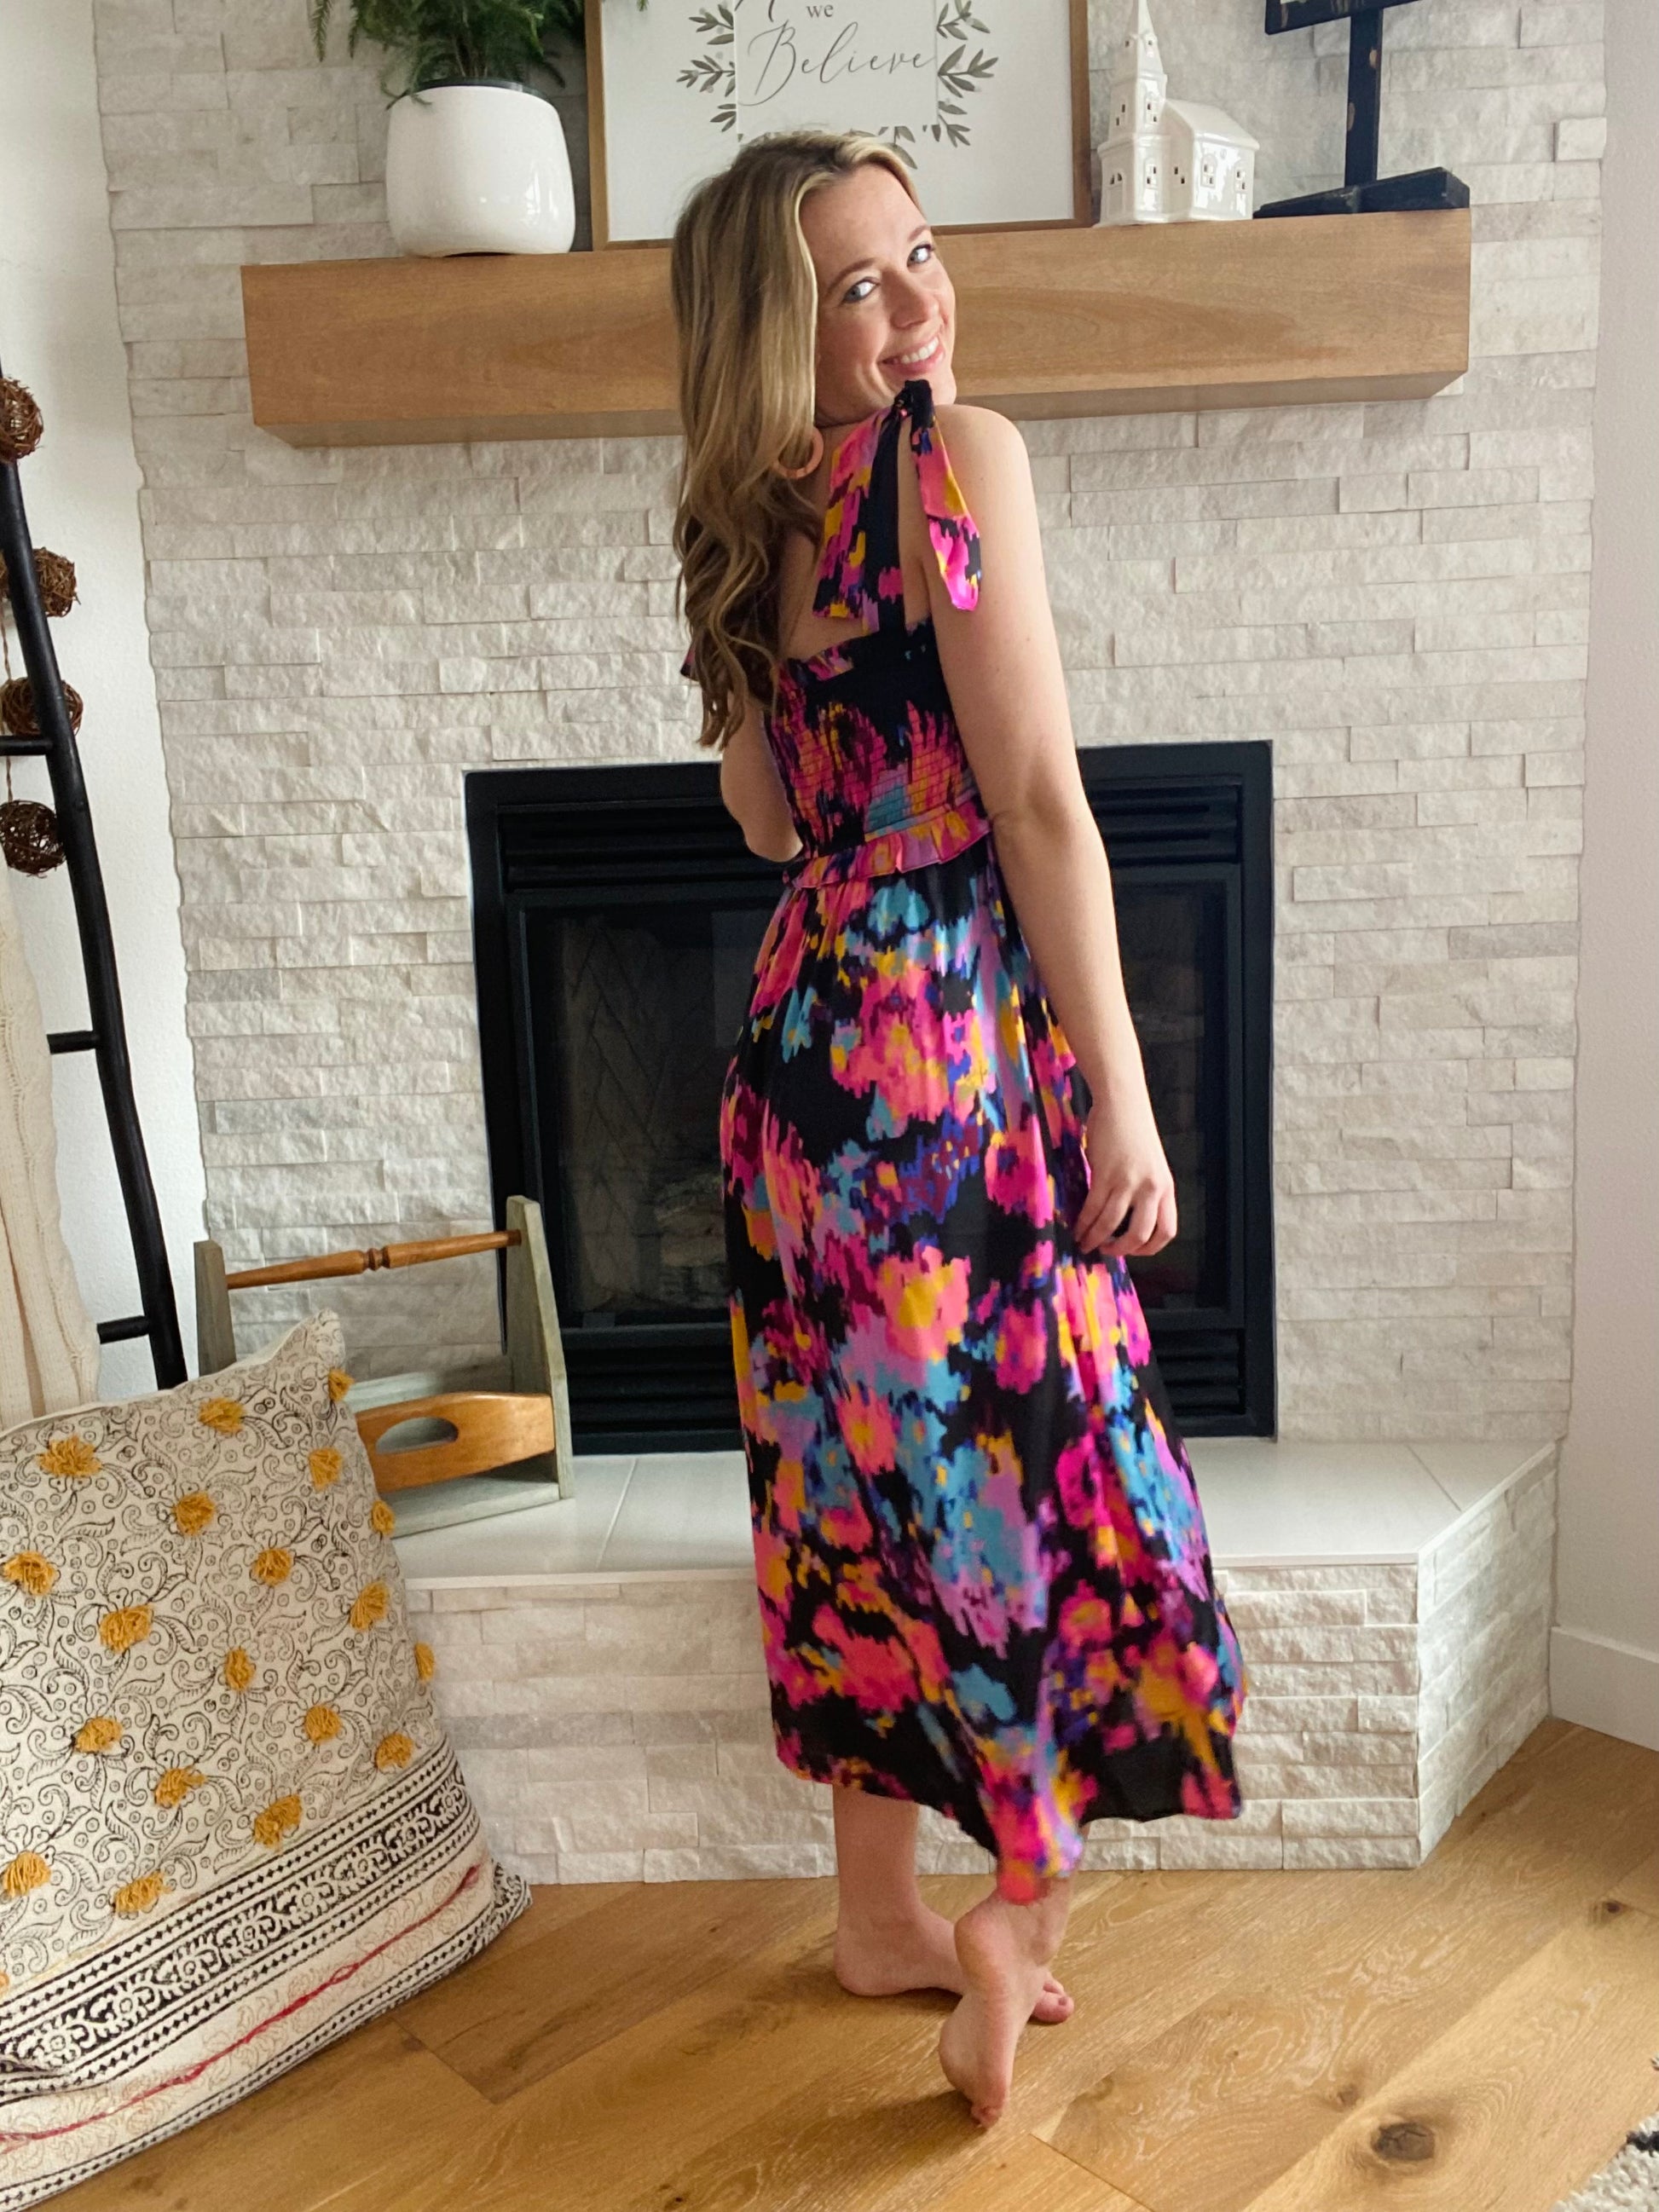 This dress screams tropical vacation and drinks with your girlfriends! The vibrant color palette is a breath of fresh air after a long winter. It fits true to size with a stretchy bodice. 